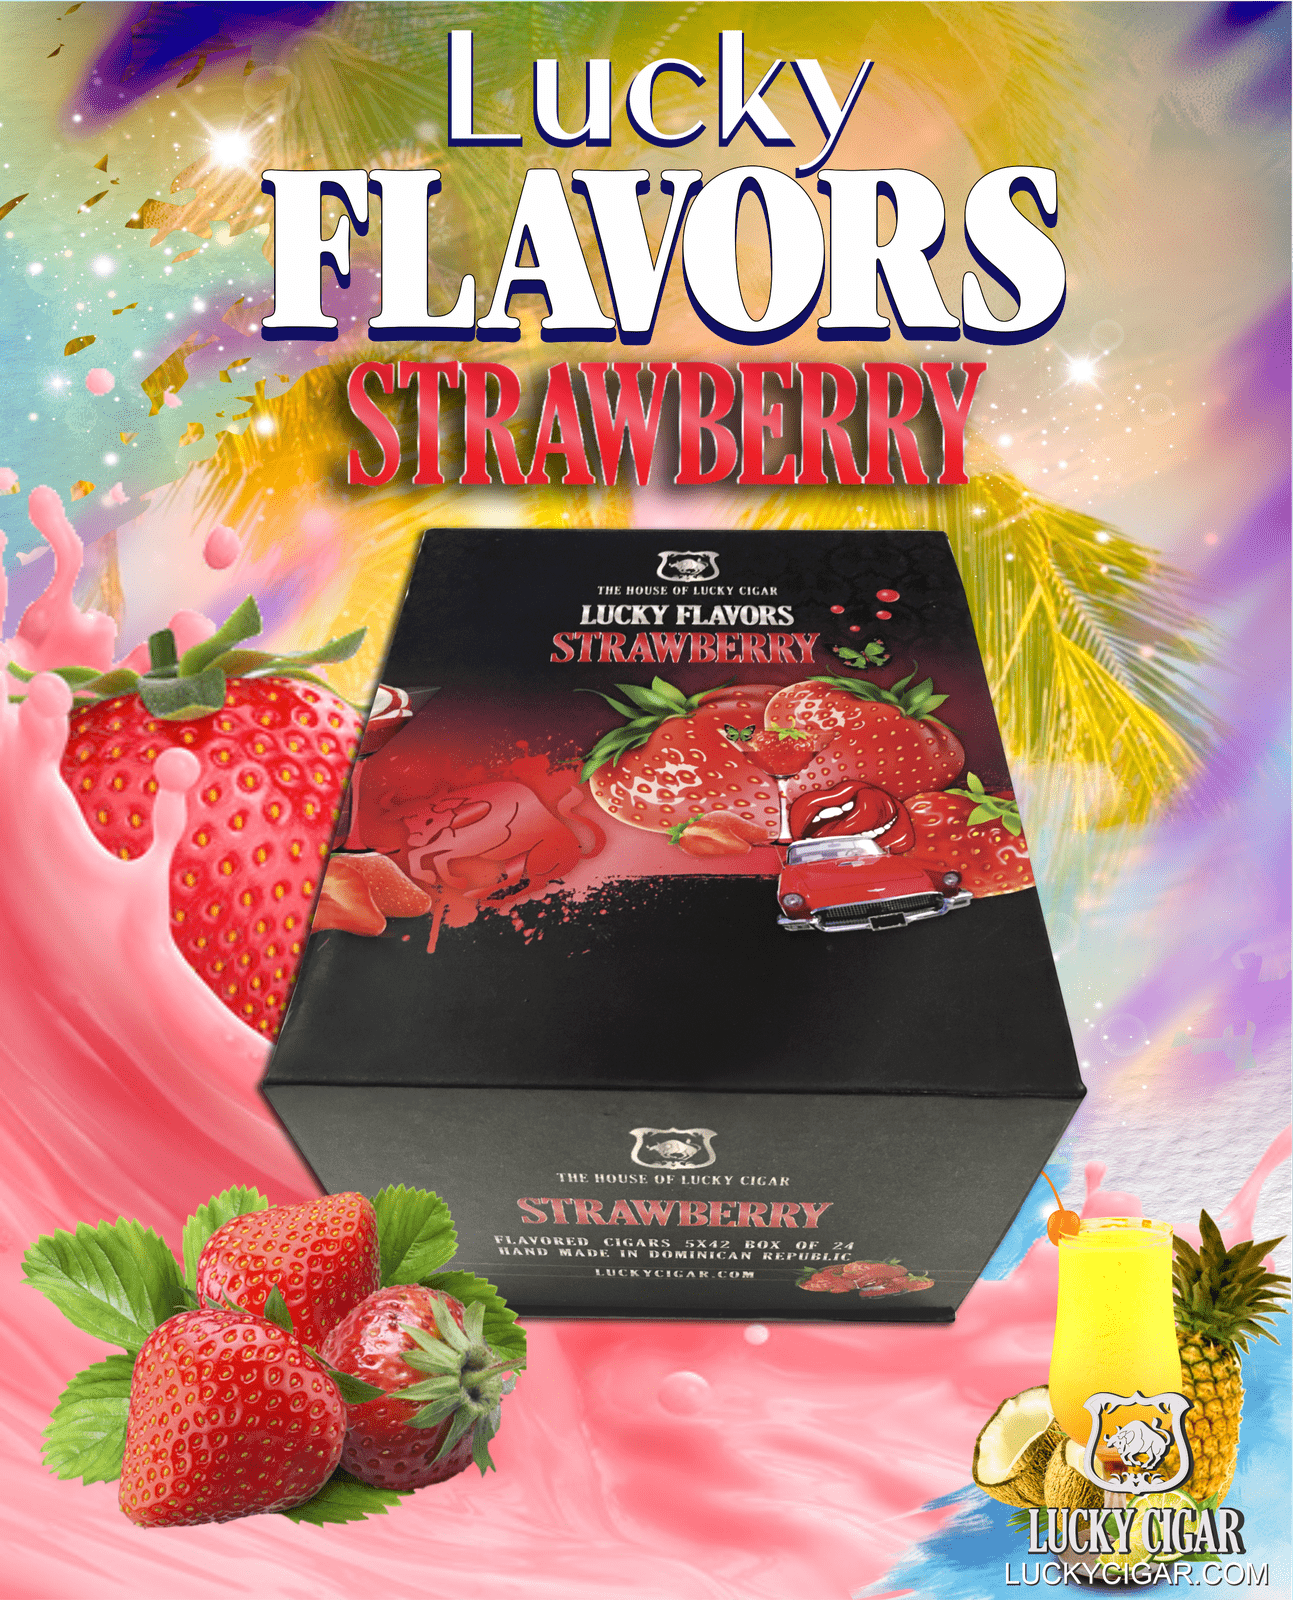 Flavored Cigars: Lucky Flavors Strawberry 5x42 Box of 24 Cigars